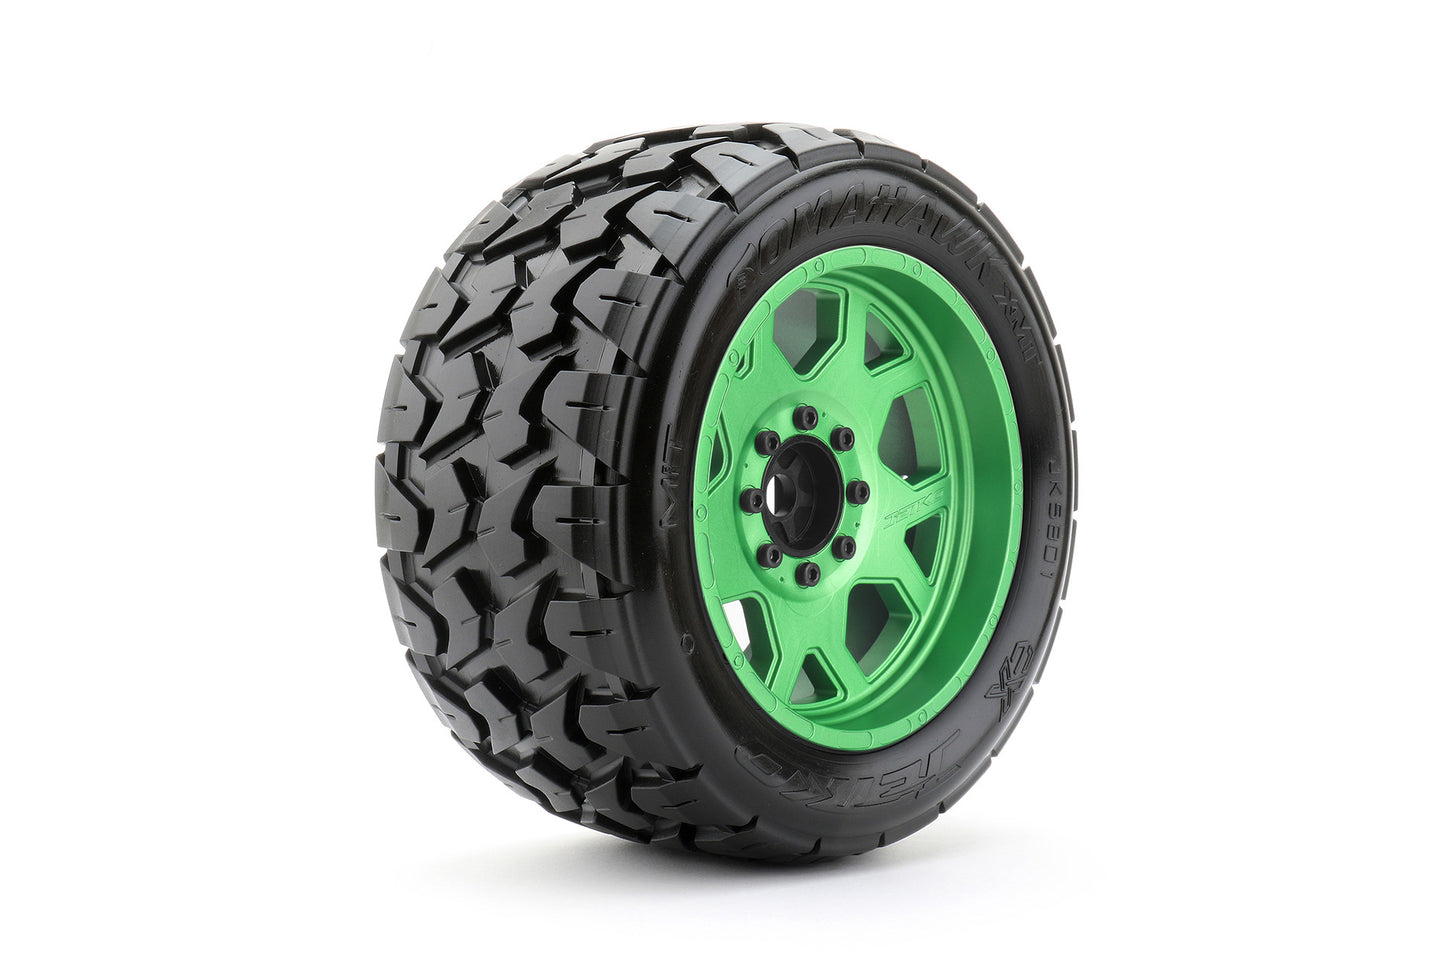 1/5 XMT EX-Tomahawk Tires Mounted on Metal Claw Rims, Medium Soft, Belted, 24mm, for Arrma Kraton